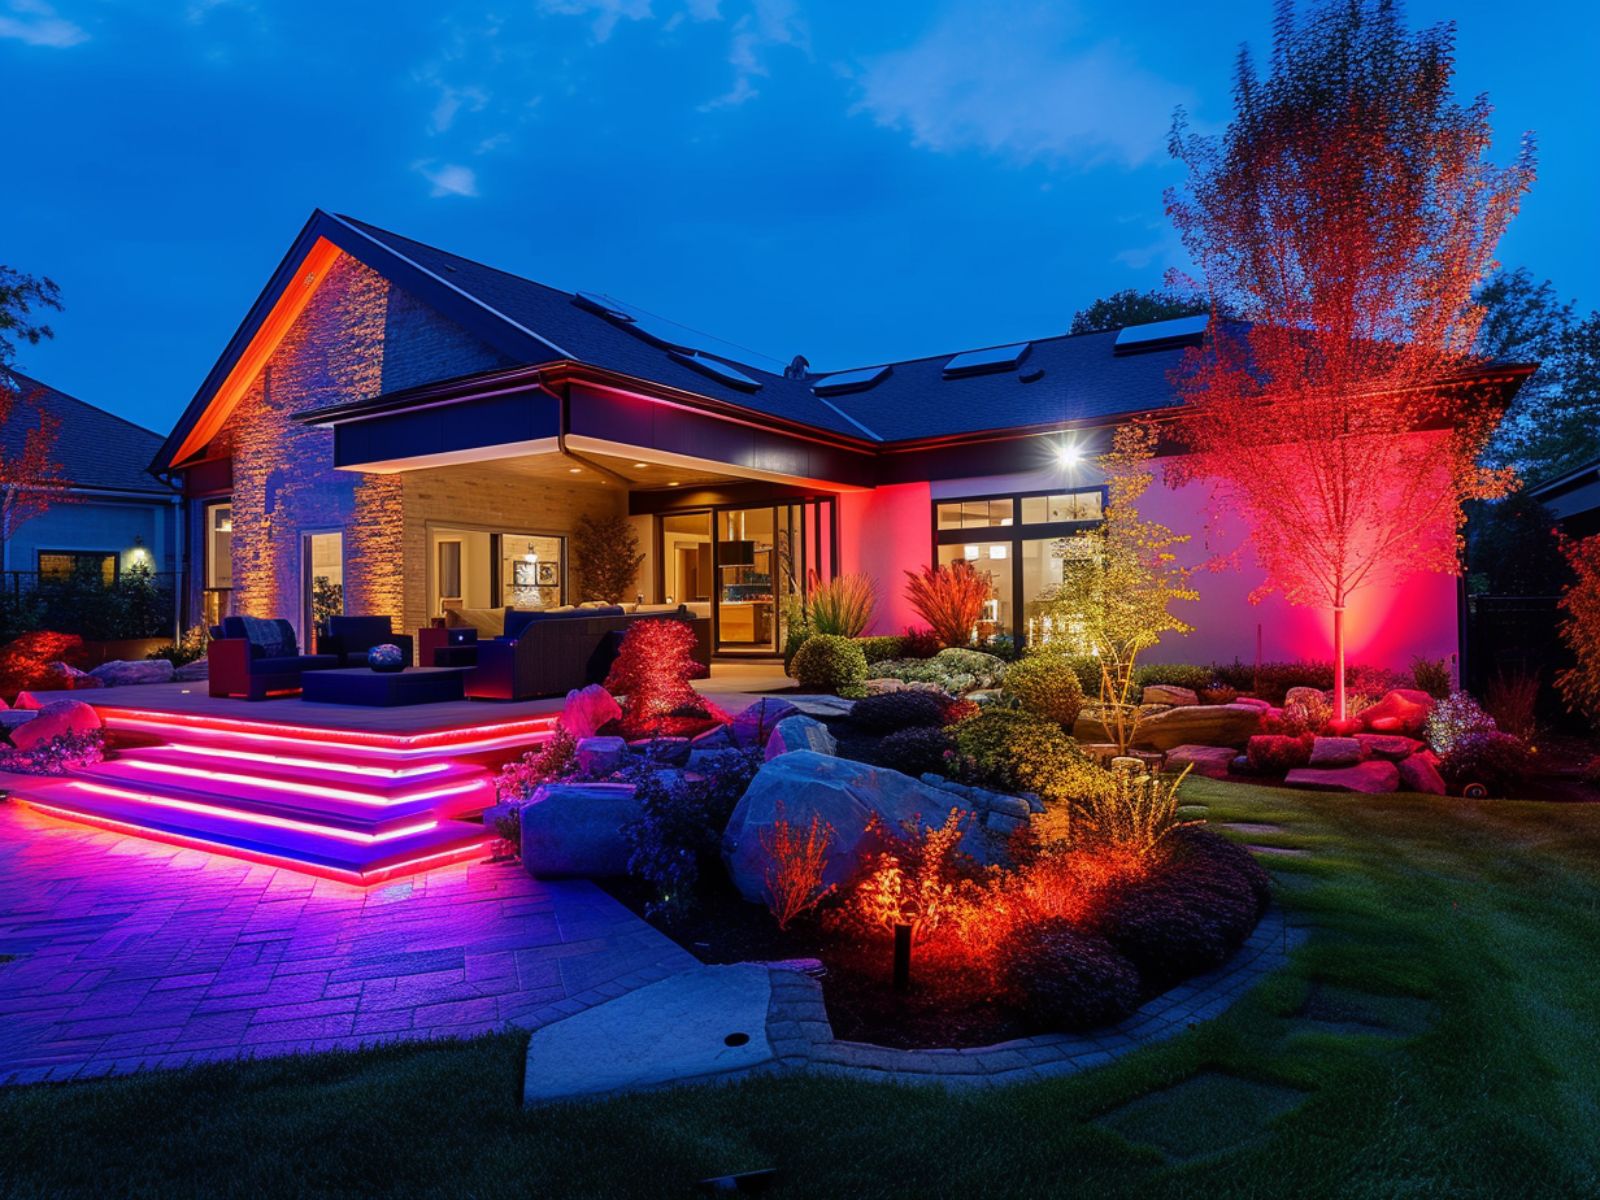 Multicolored smart landscaping lights illuminating a house's front yard